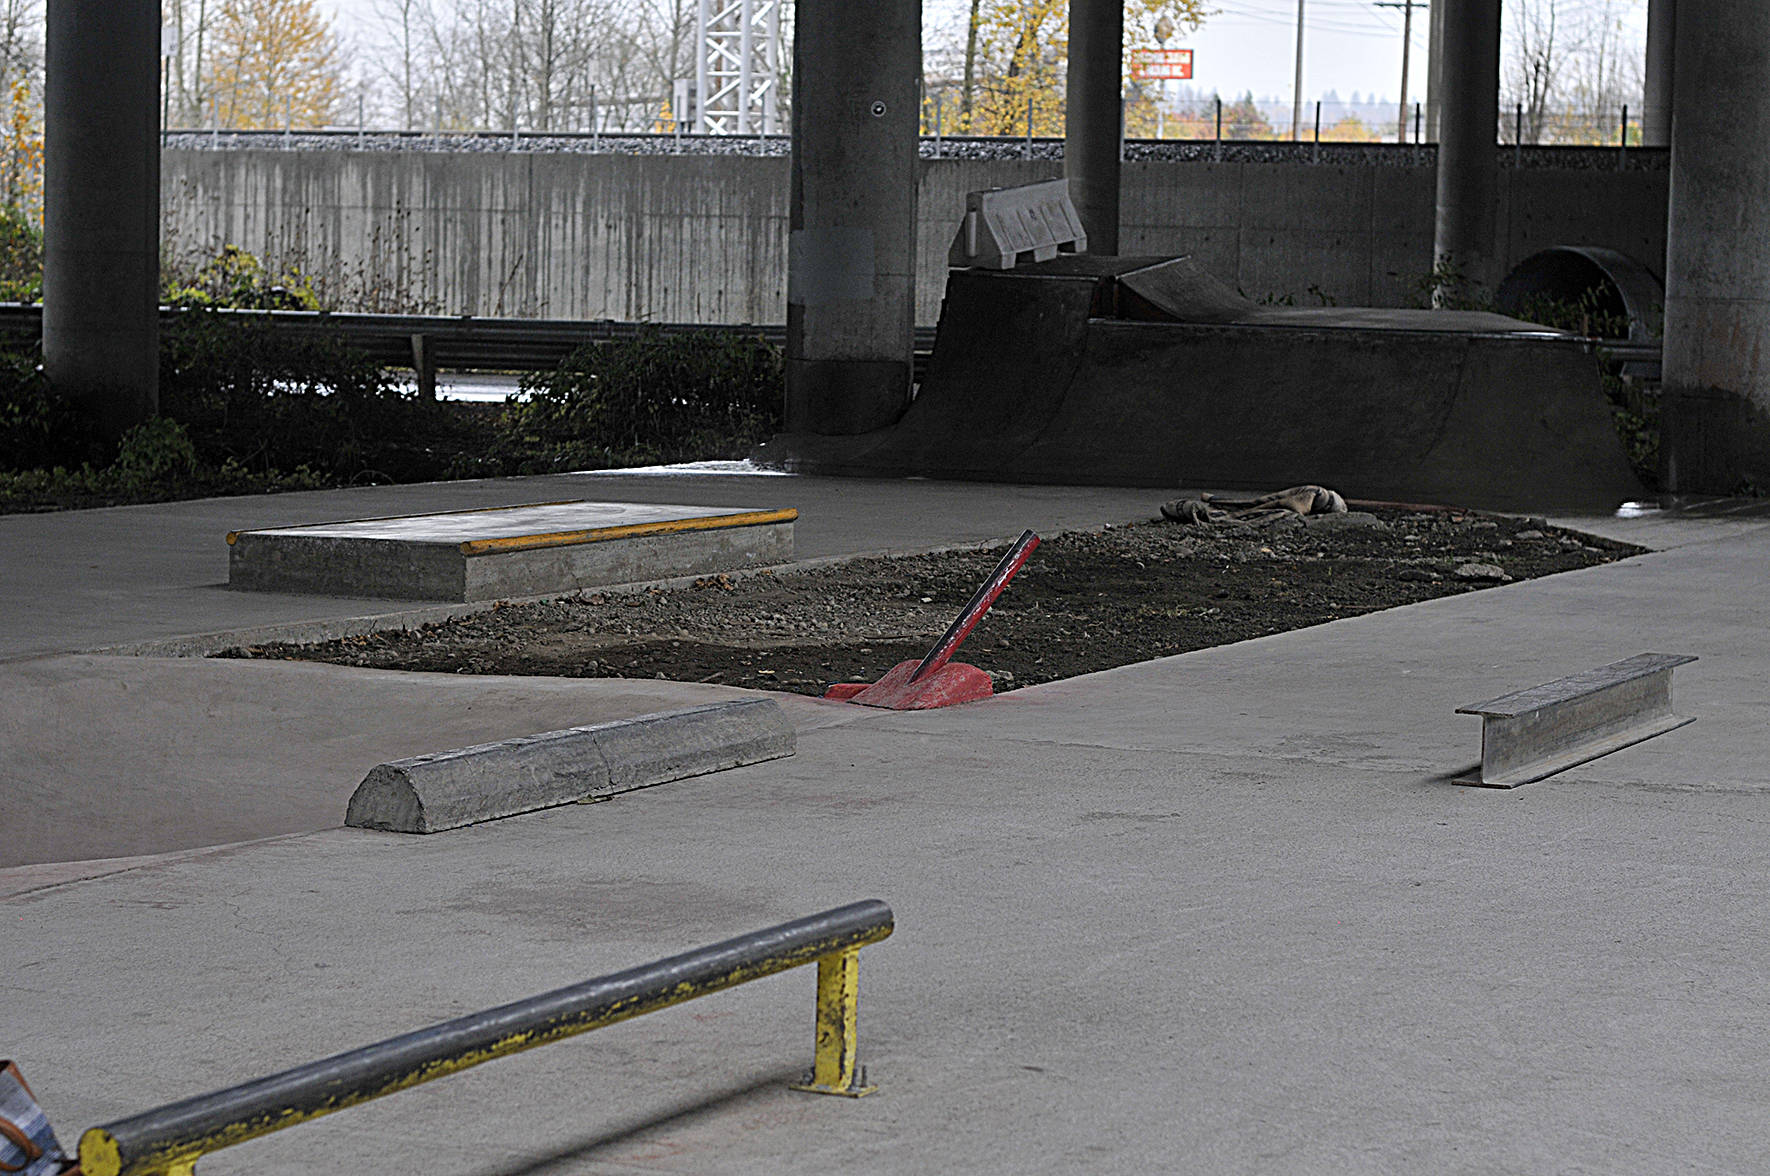 WSDOT put a halt on their Longacres Skatepark demolition park and is allowing the skating community a chance to lease the property. (Leah Abraham | Renton Reporter)